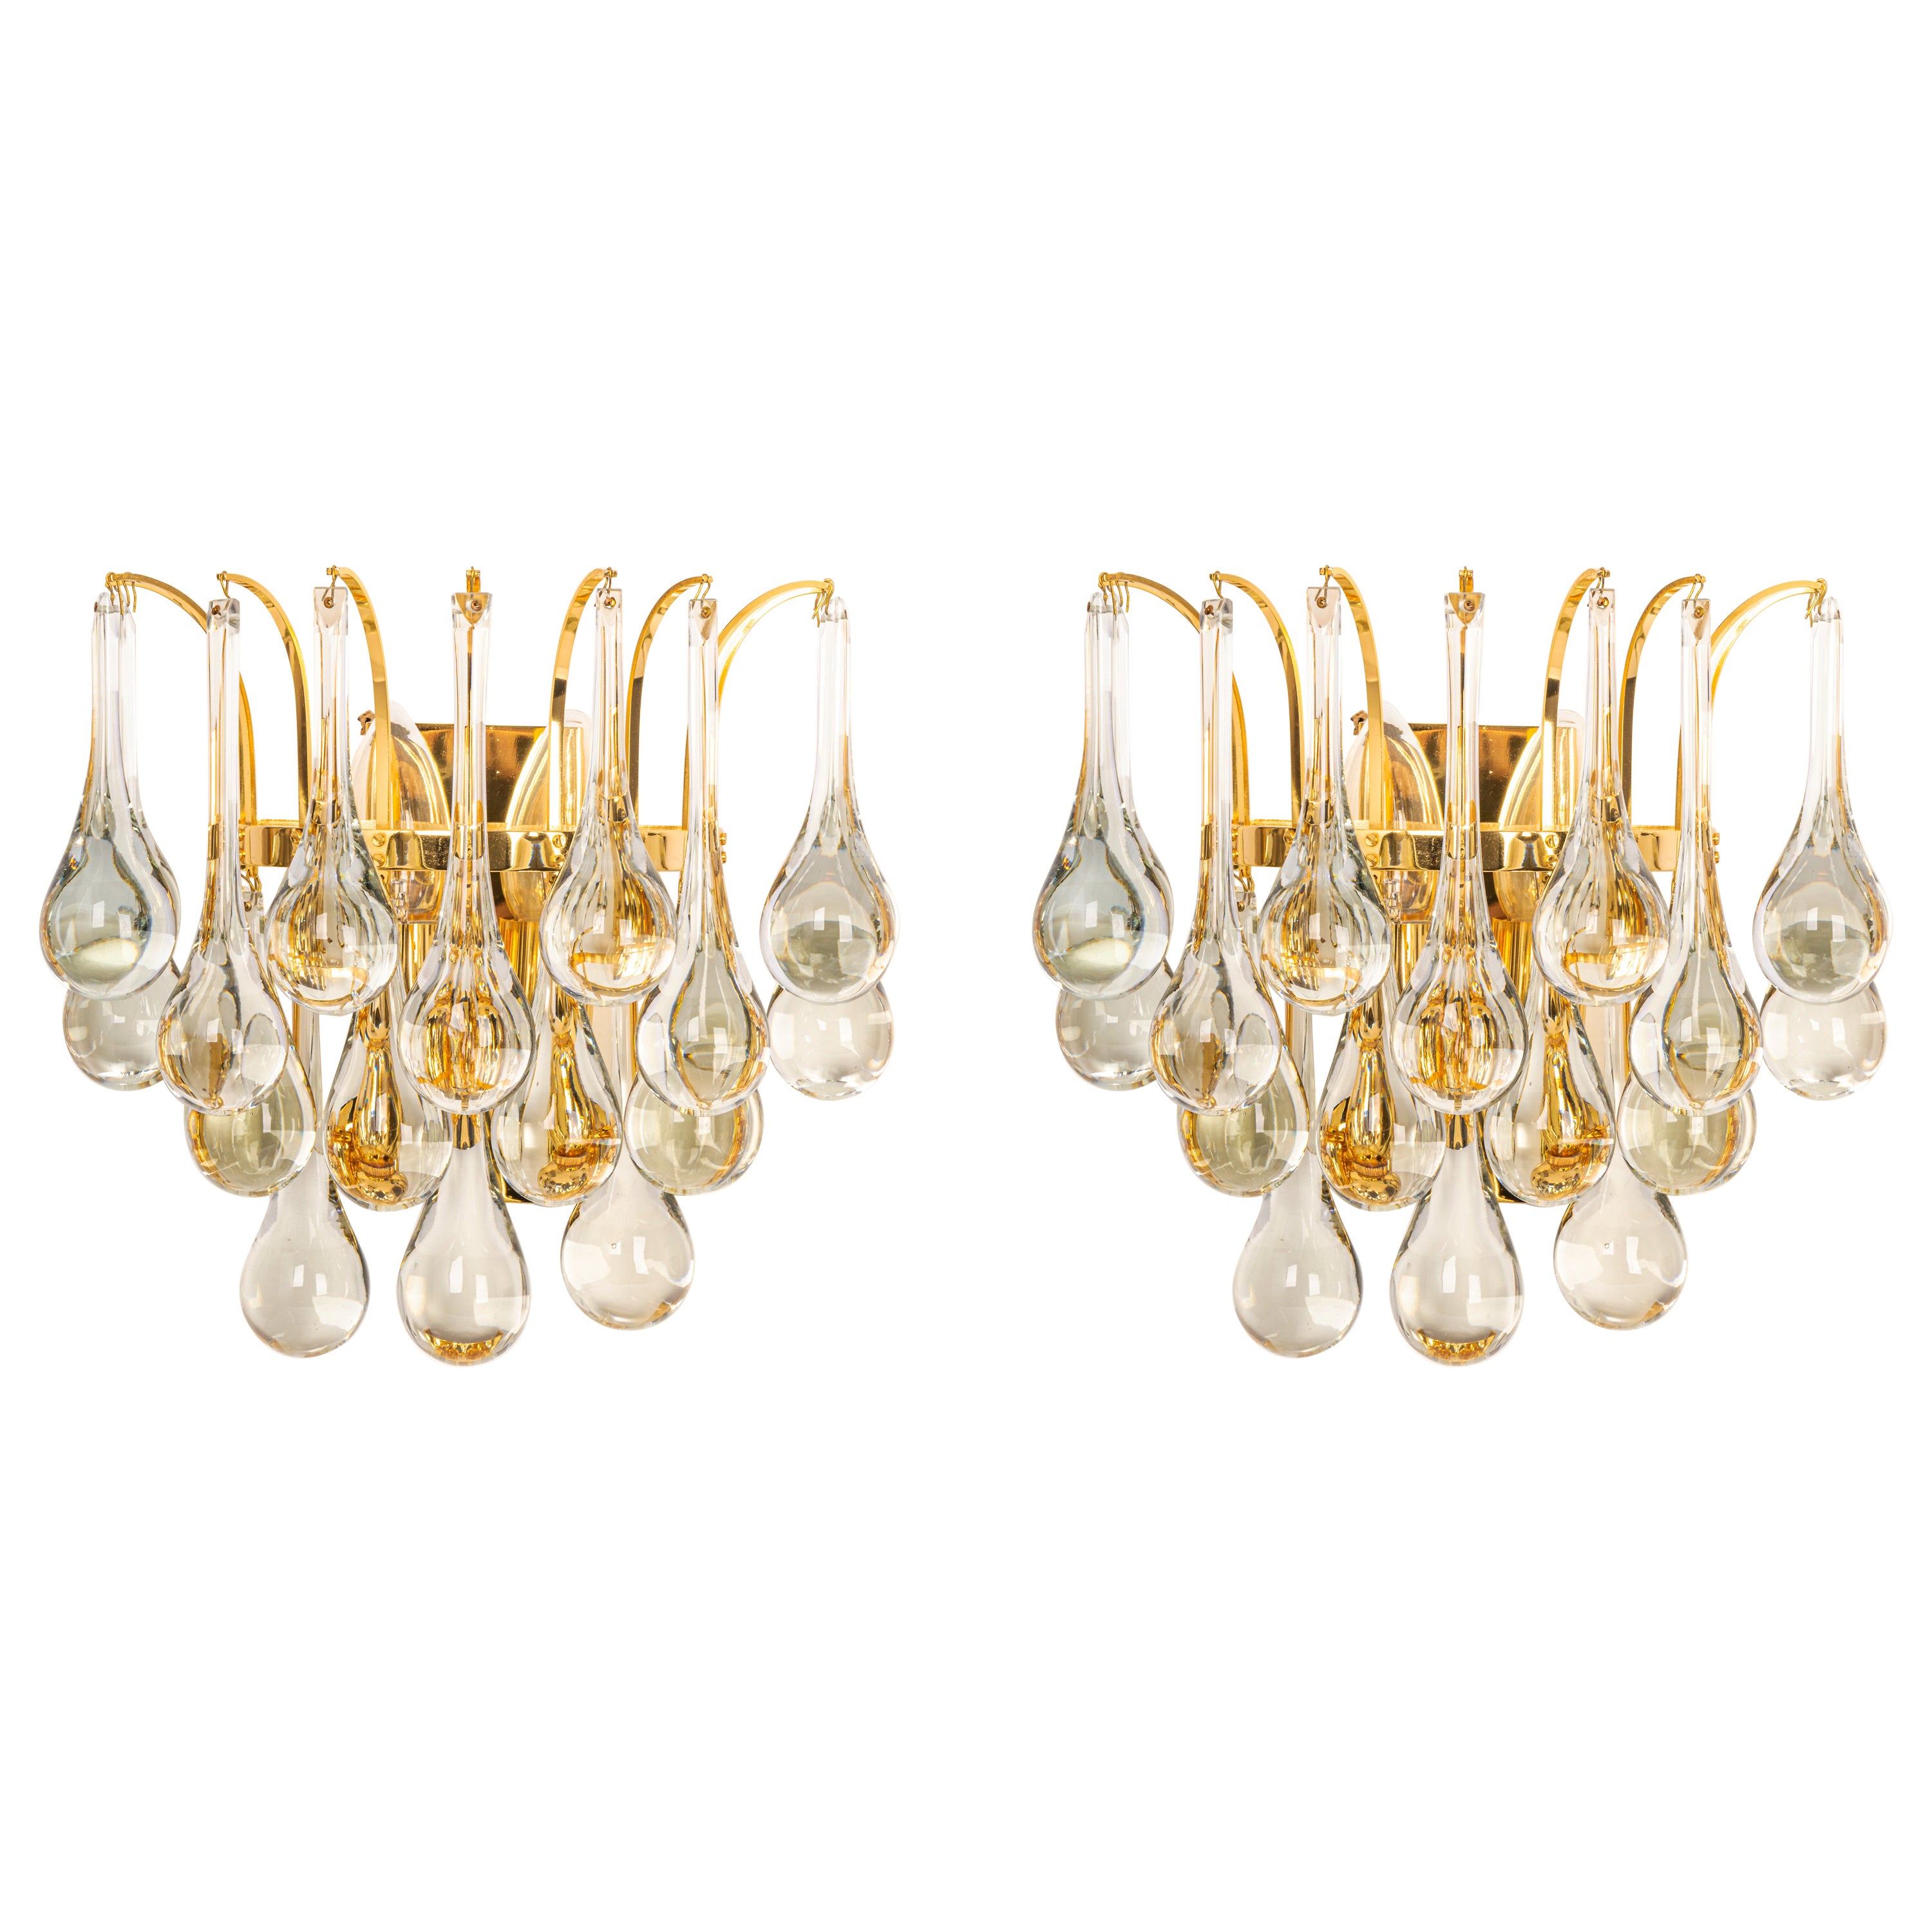 Large Pair of Golden Gilded Brass and Crystal Sconces by C.Palme, Germany, 1970s